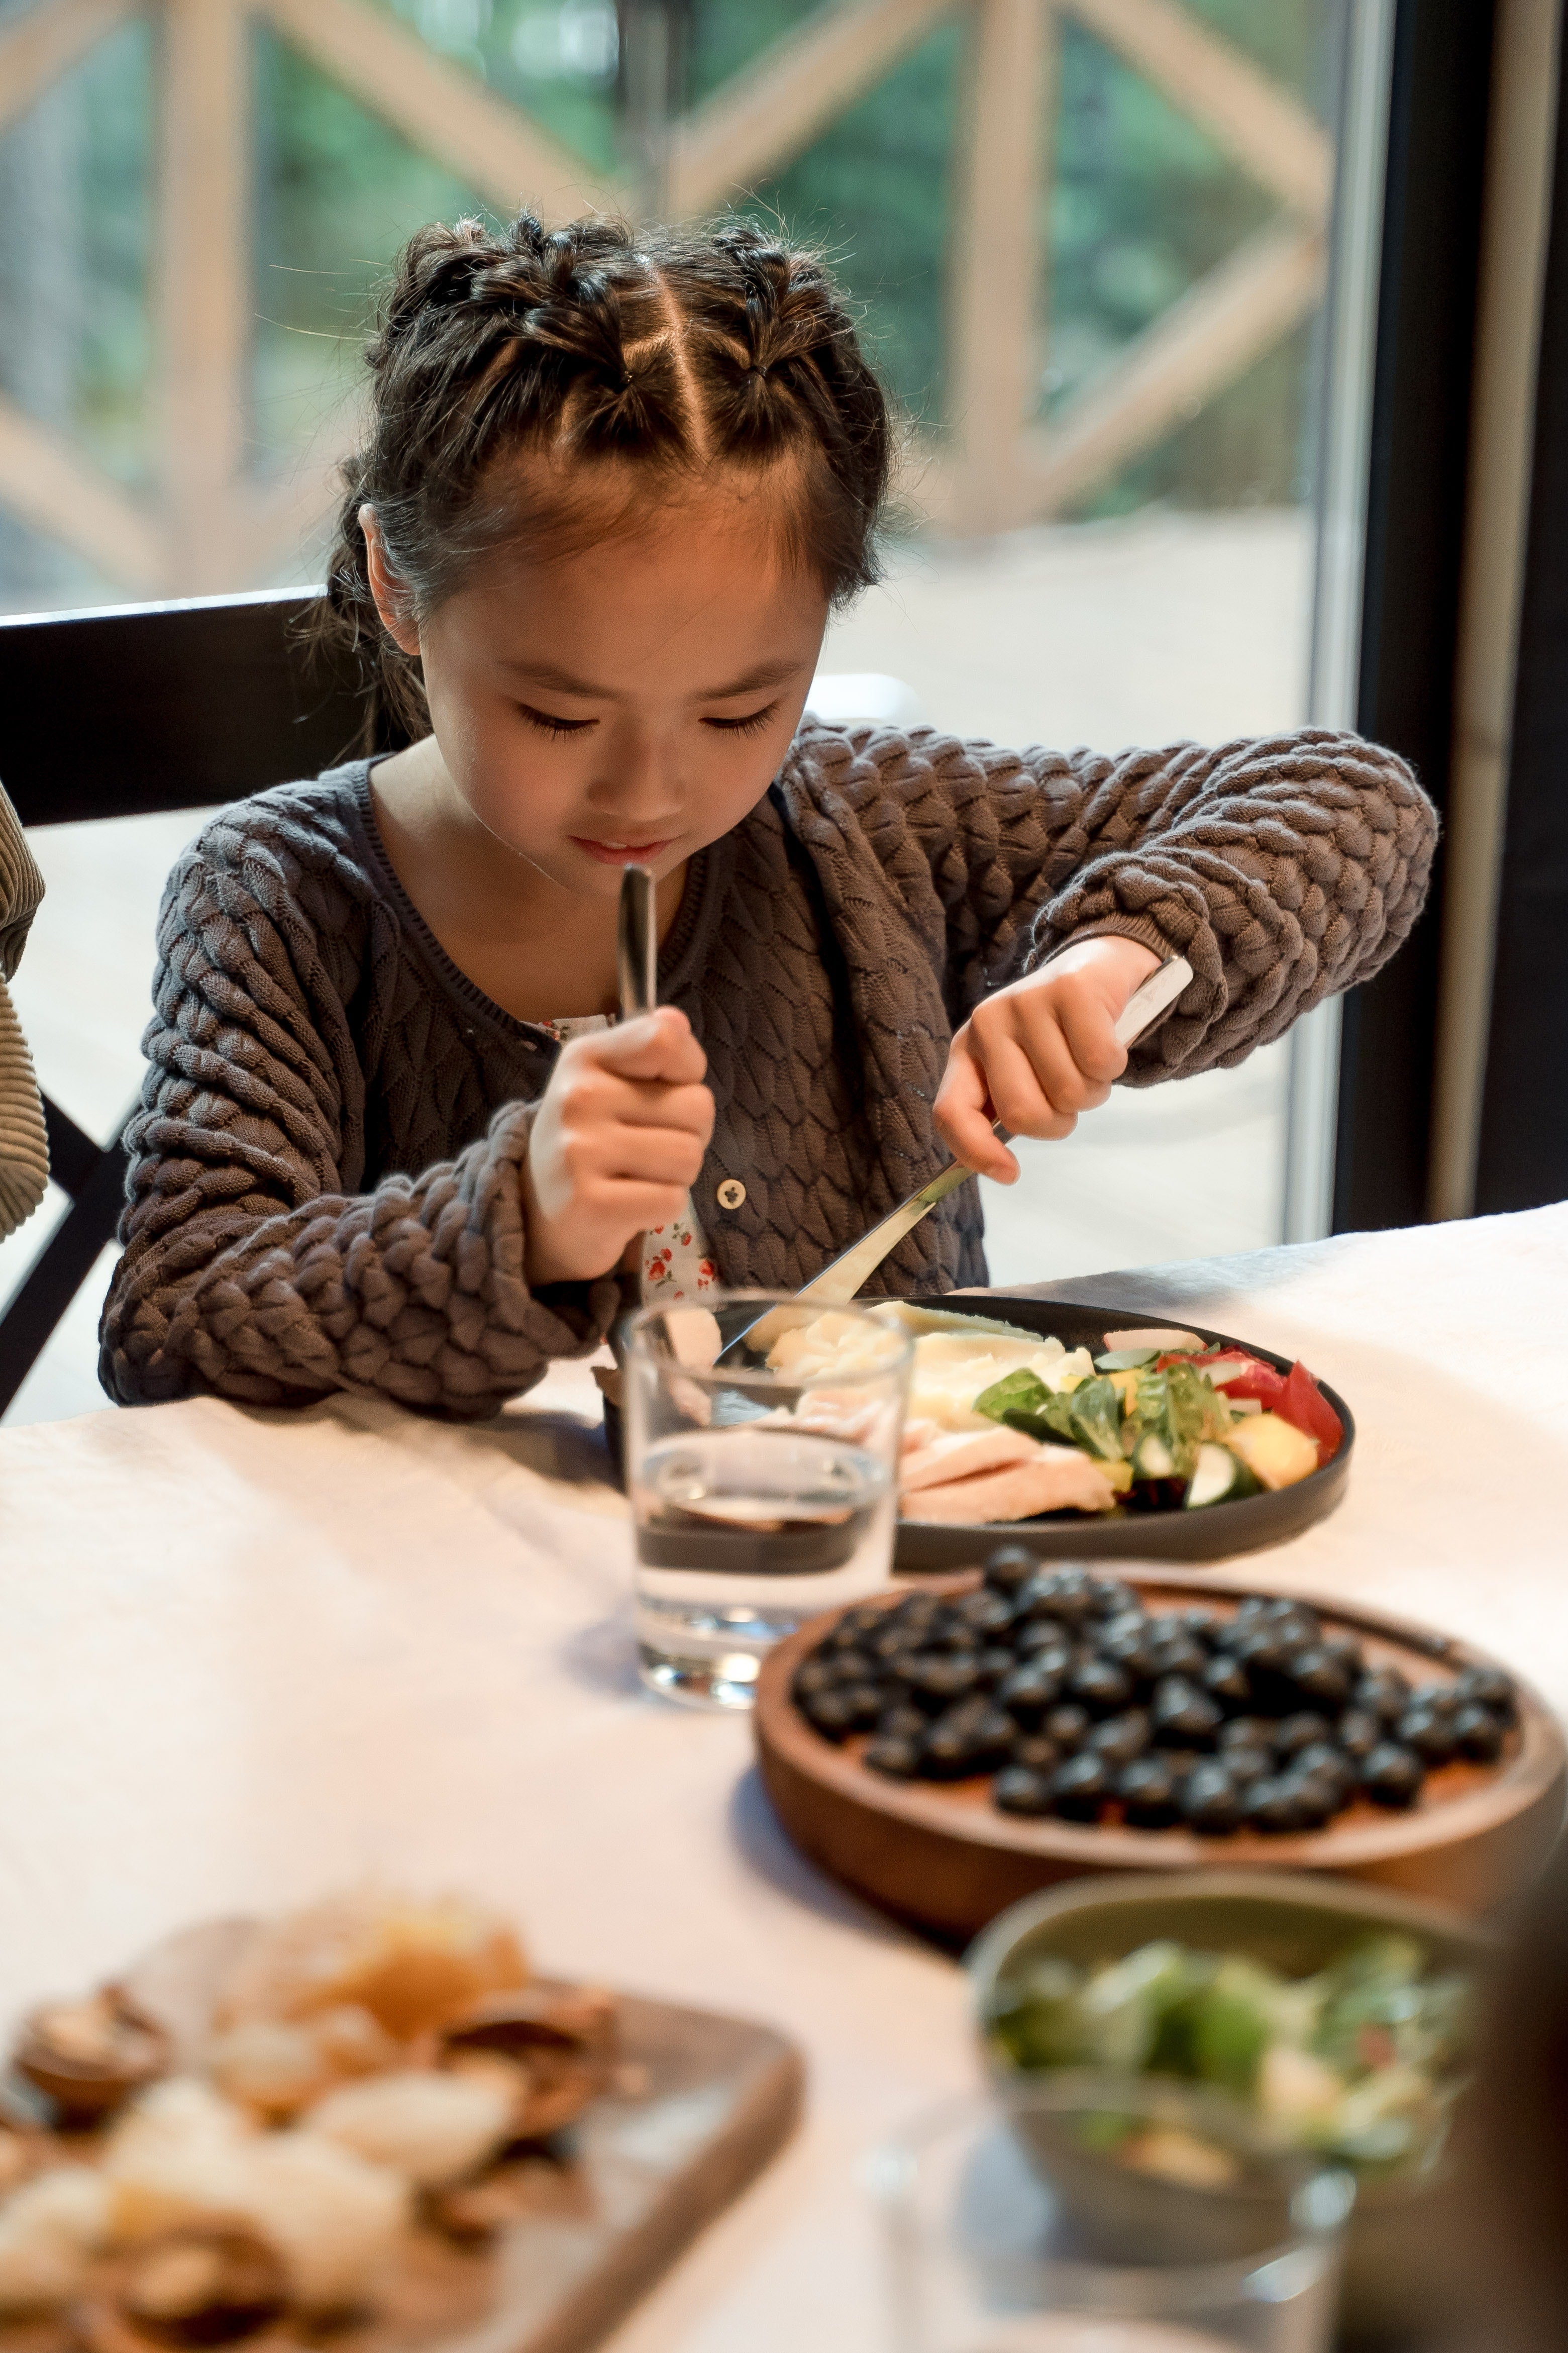 How Can I Increase Protein In My Child's Diet?